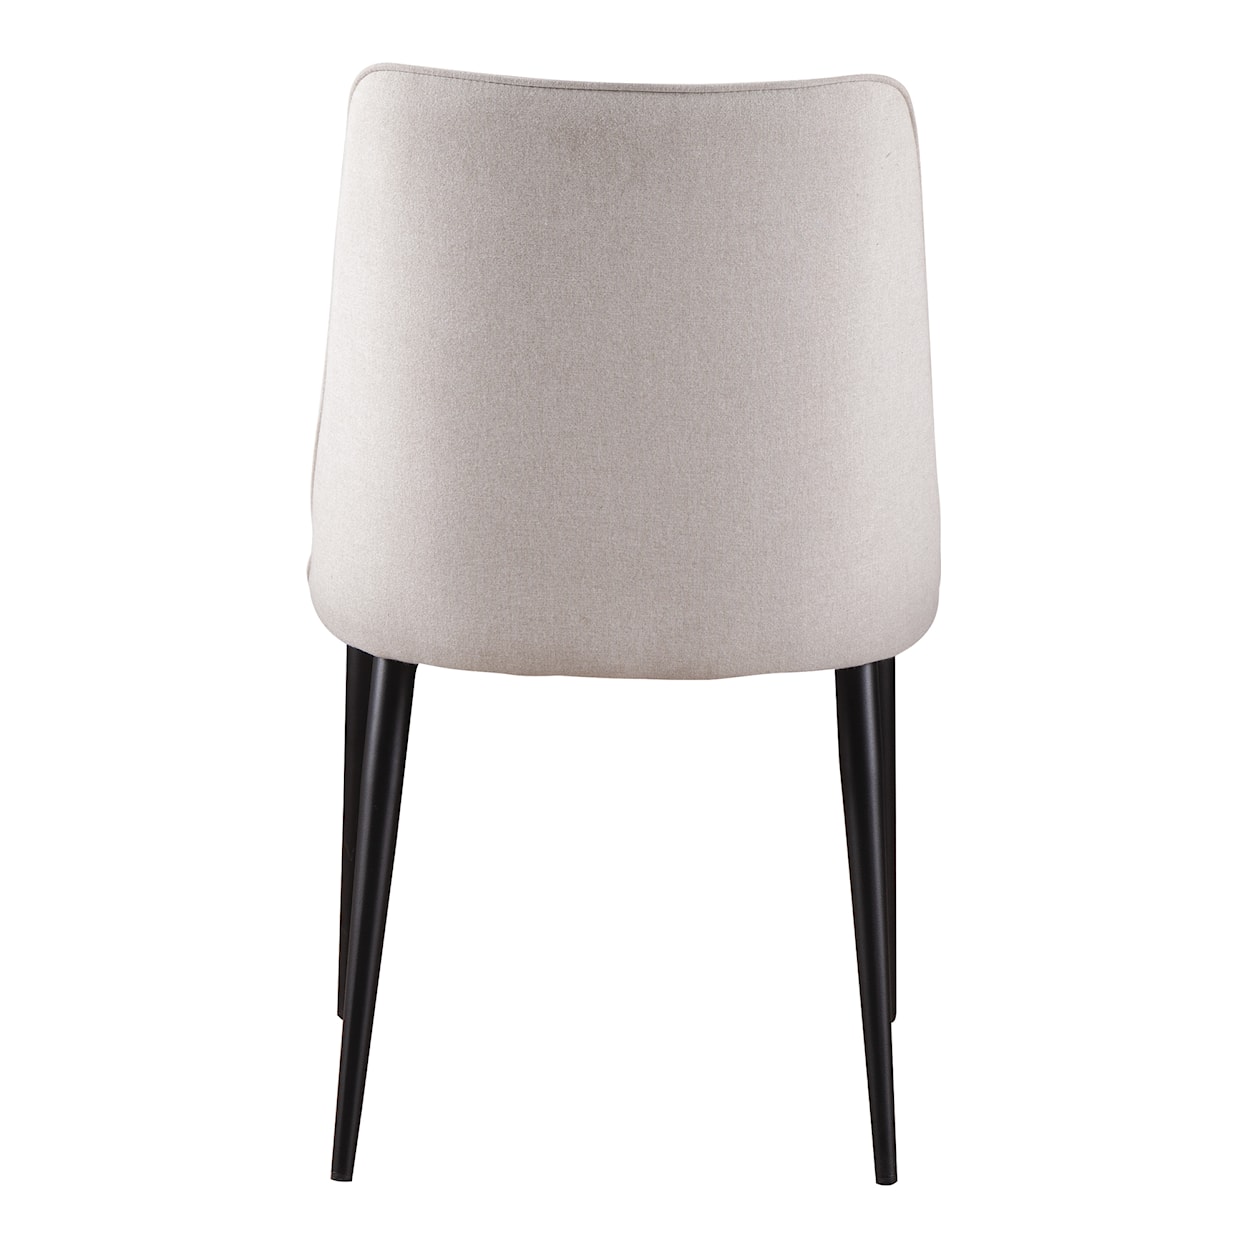 Moe's Home Collection Lula Upholstered Dining Chair